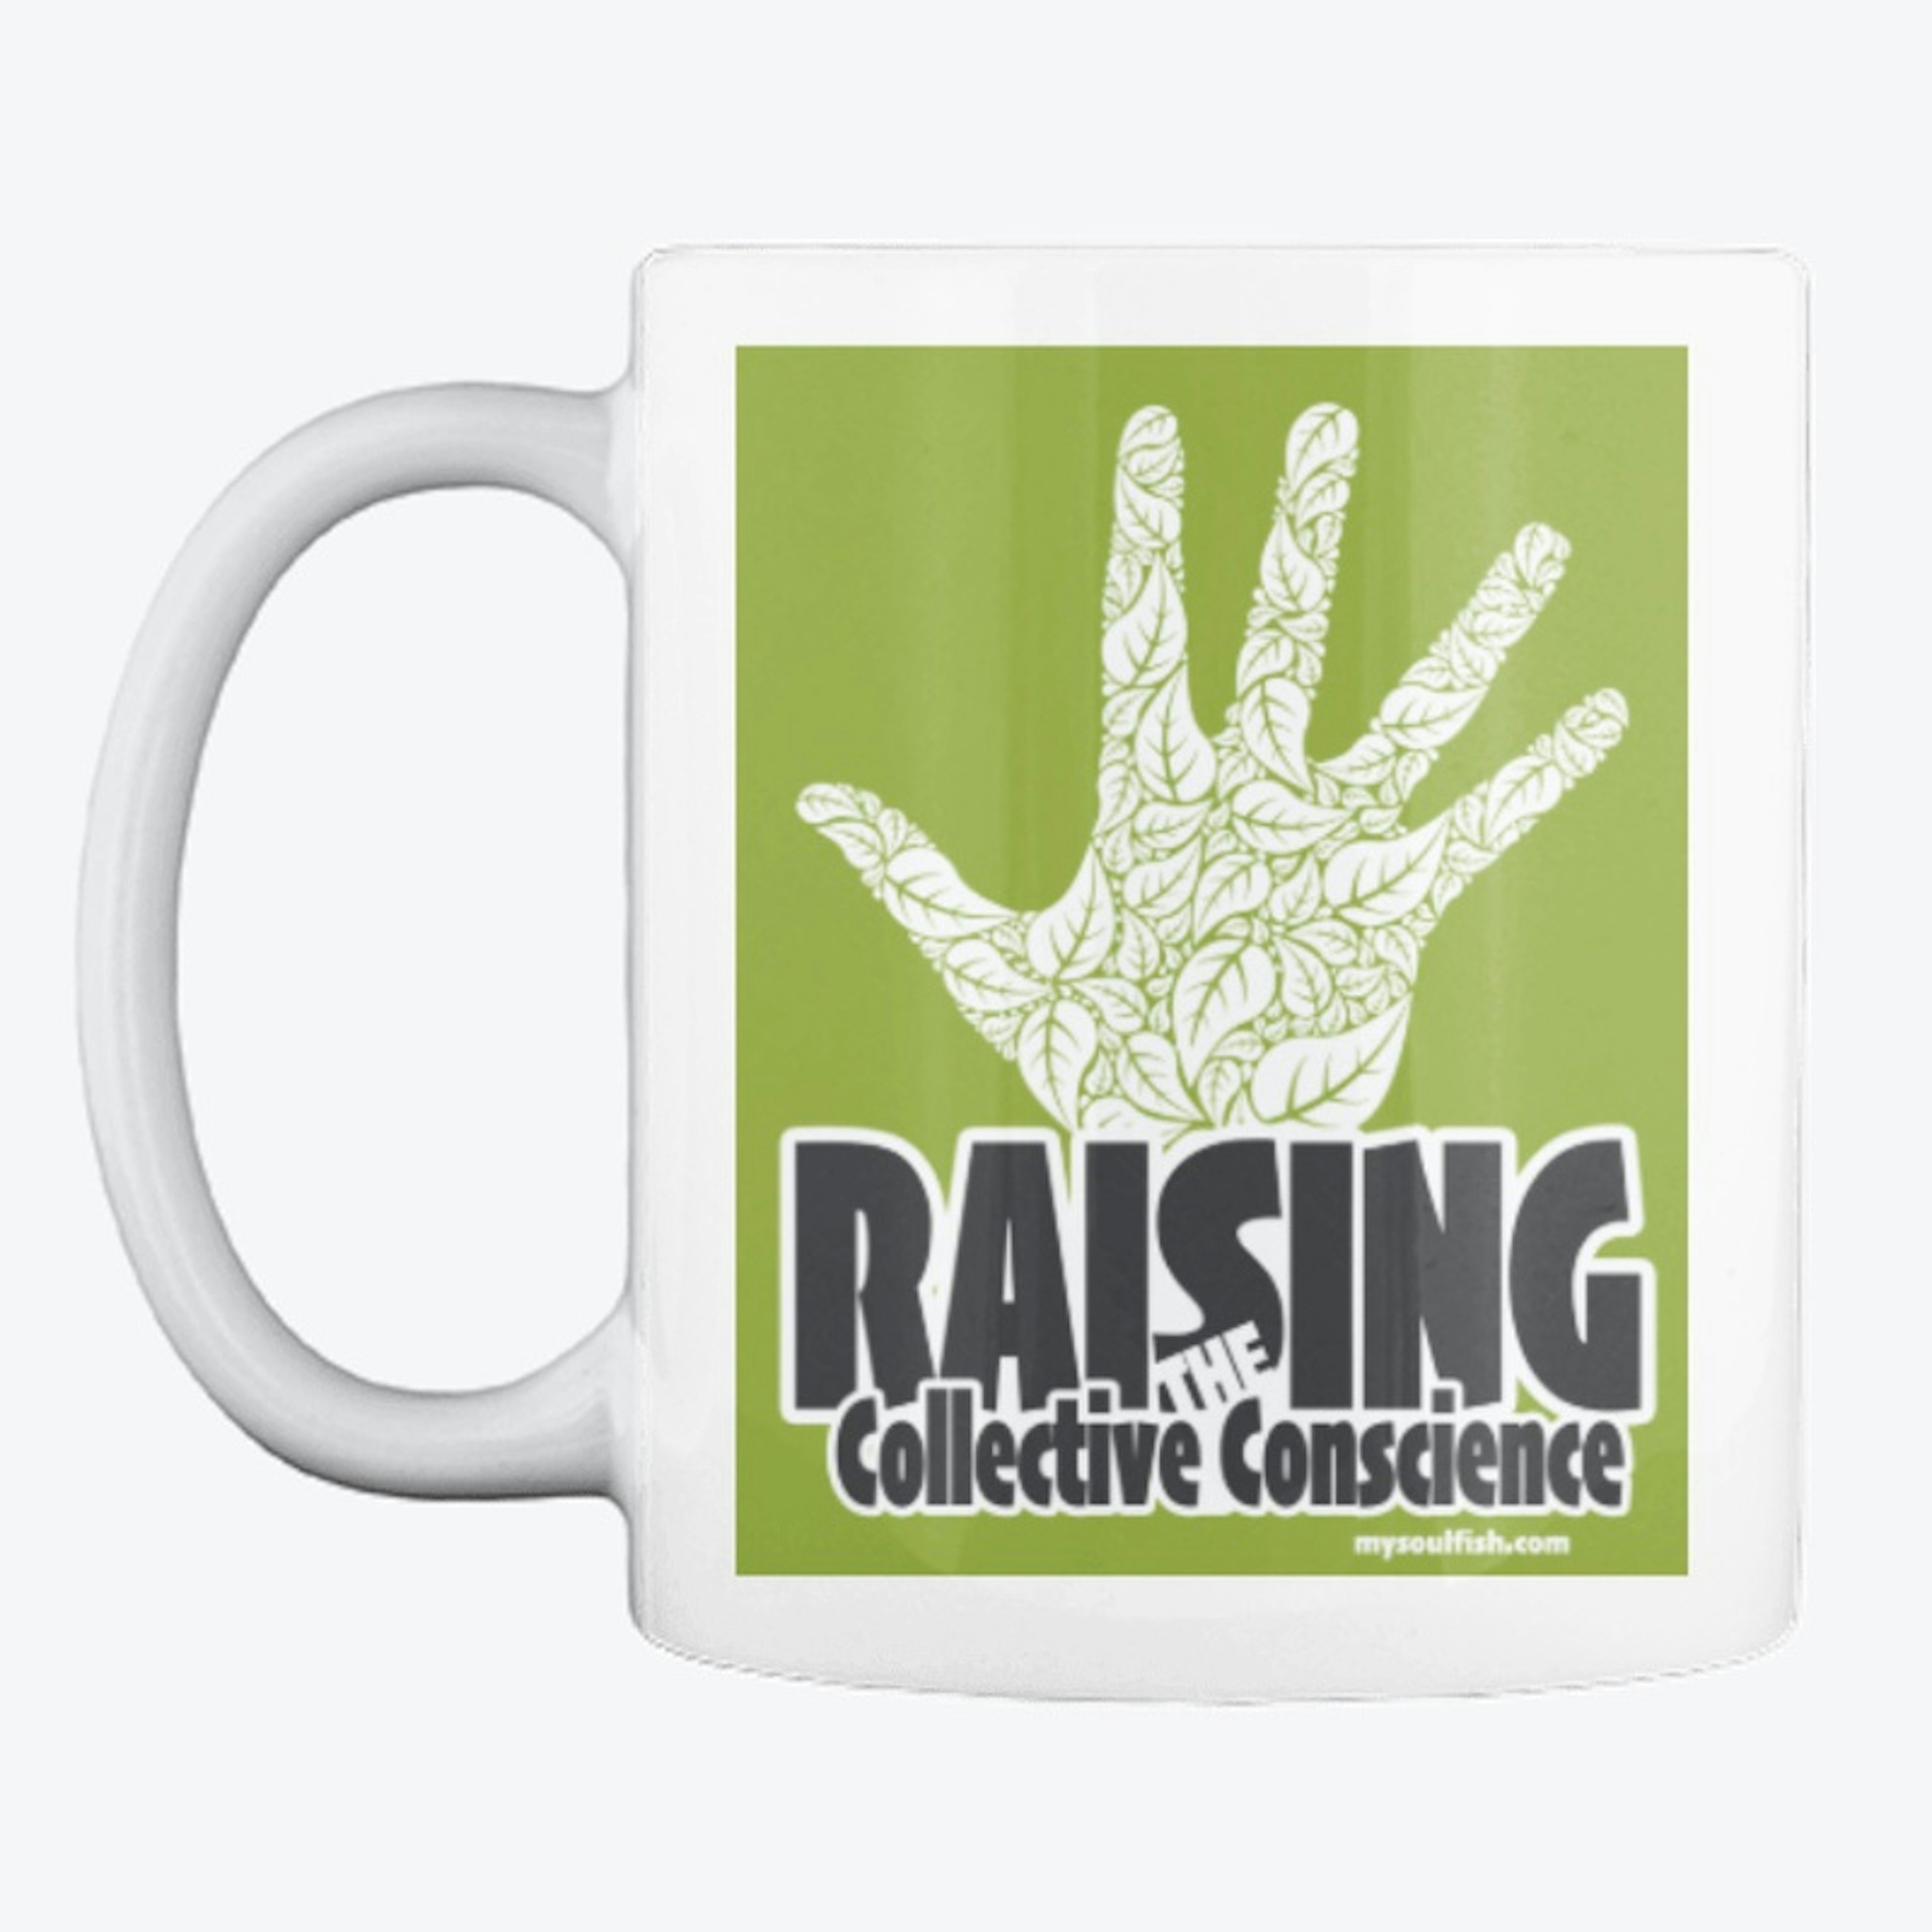 Raising the Collective Conscience